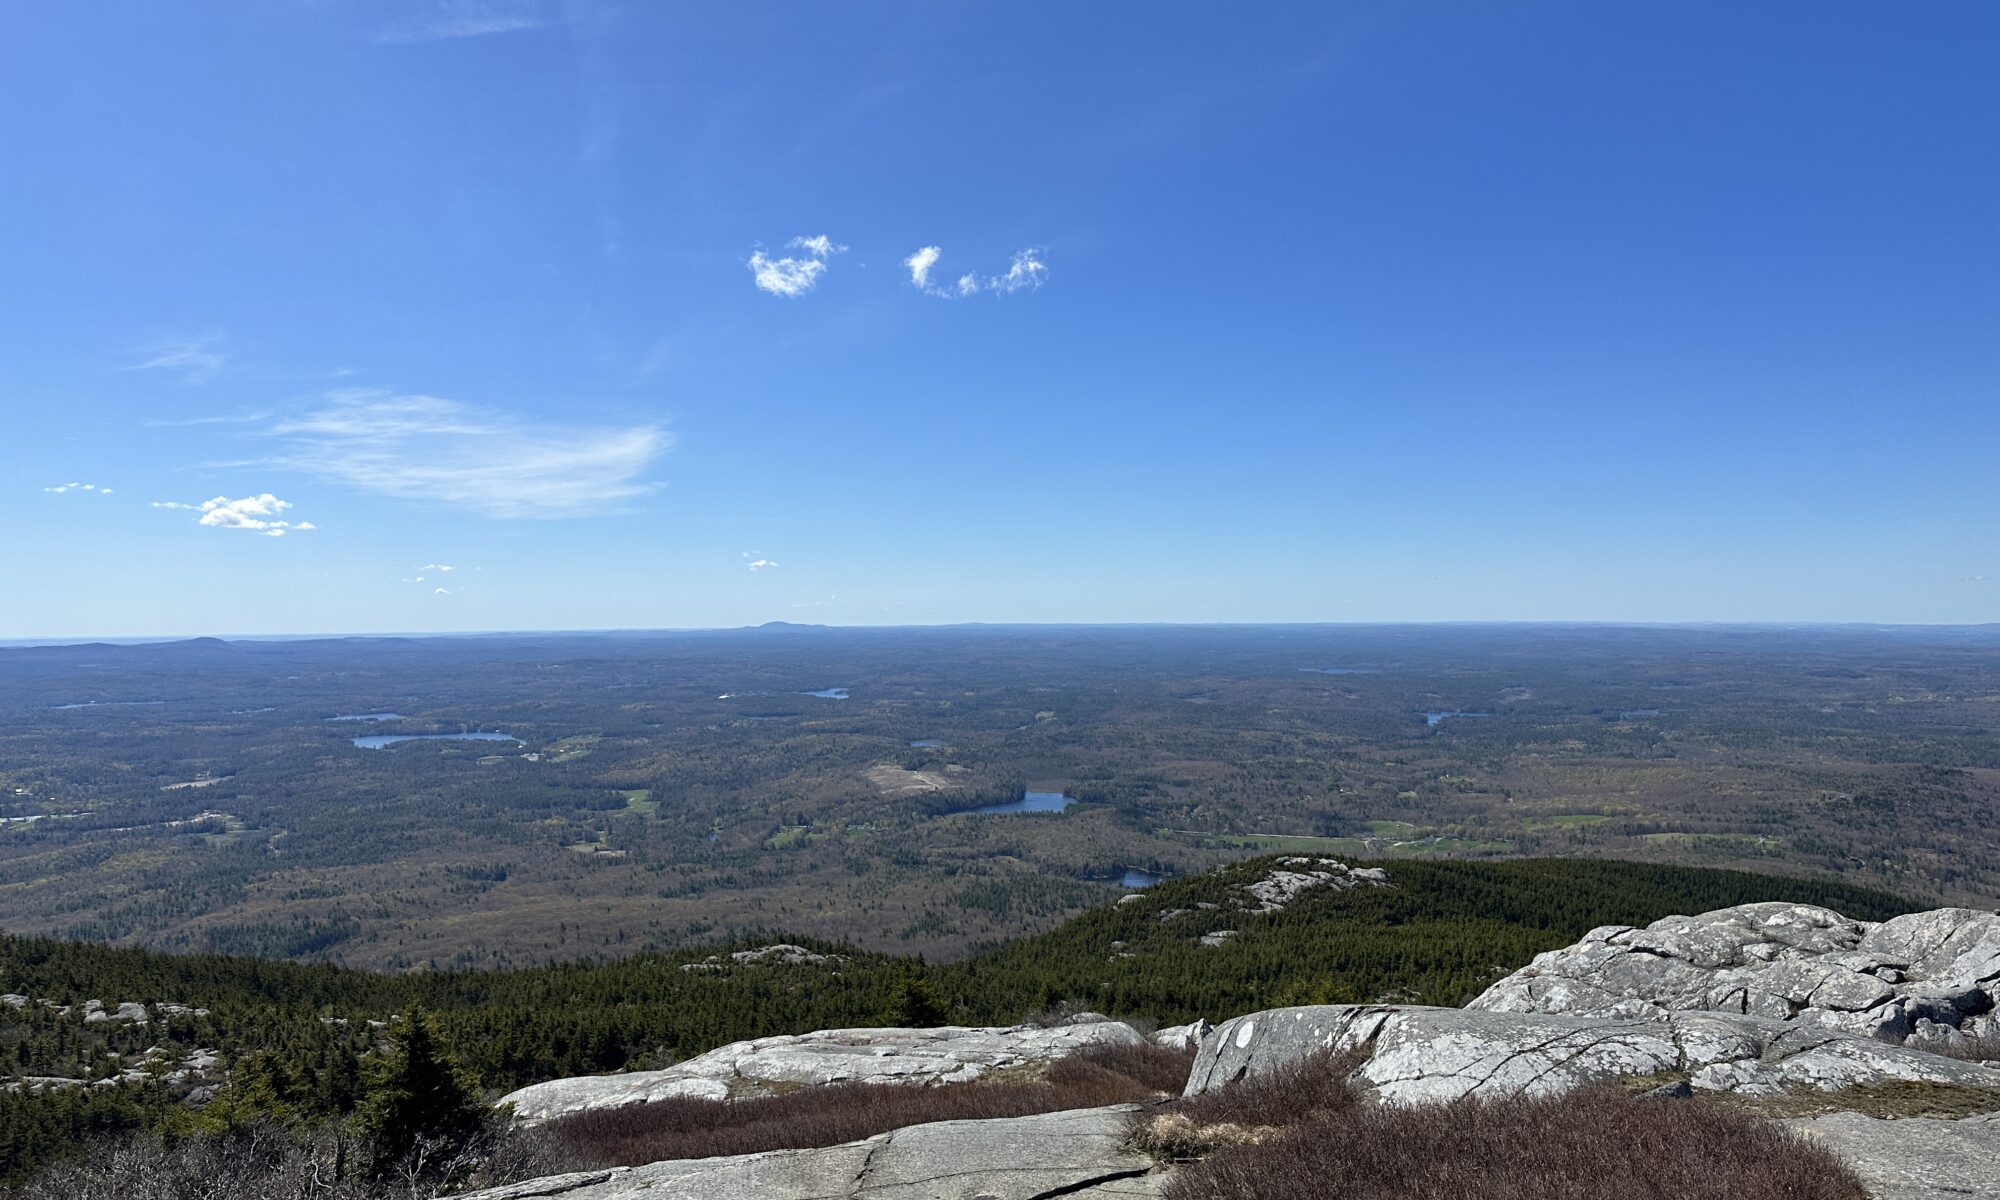 This image is the peak of Mt. Monadnock where you could see blue skies, lakes, and nature!